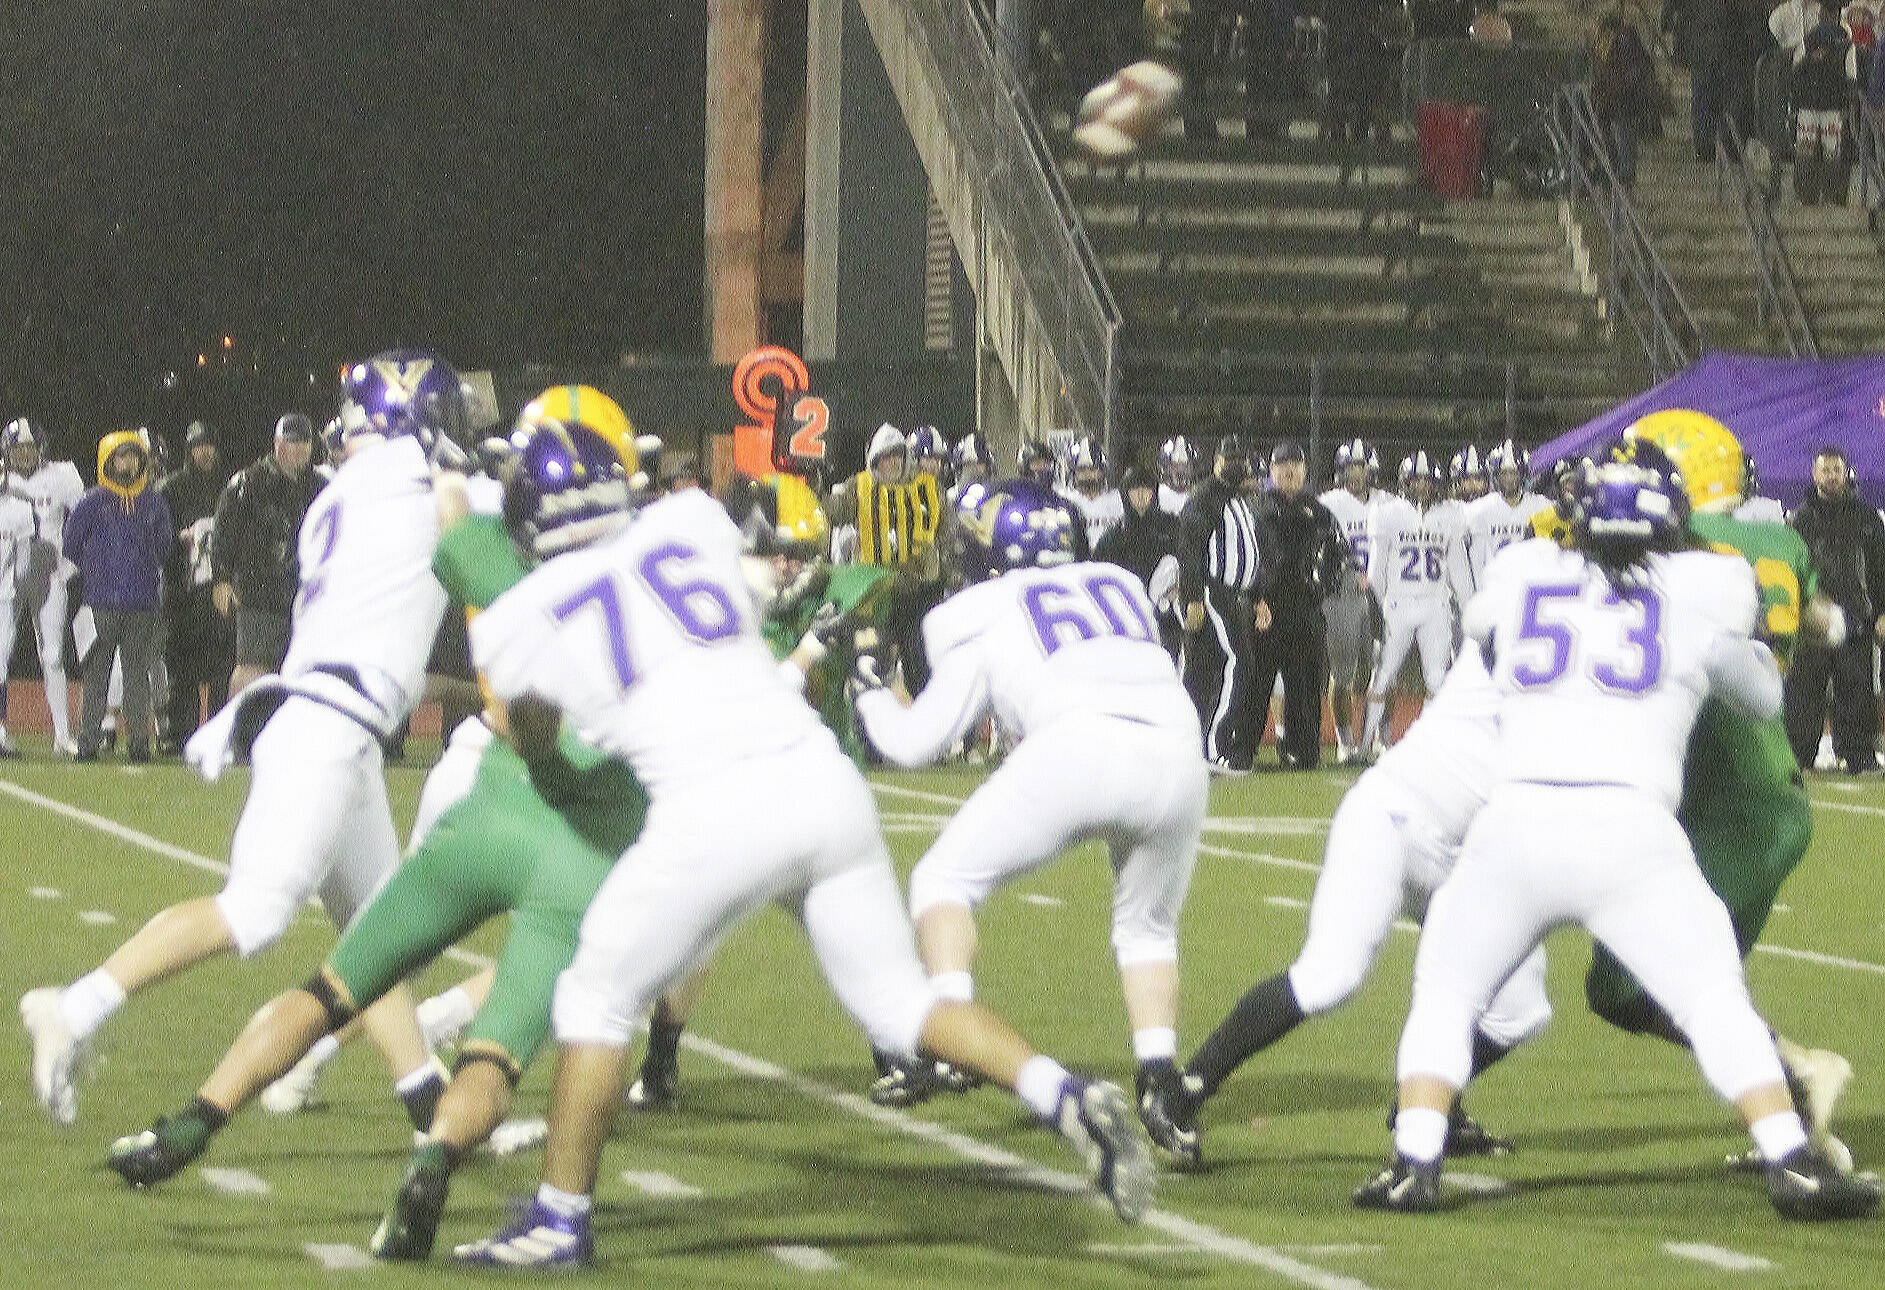 Sofian Hammou (76), Lincoln Hawkins (60) and Jesus Mares (53) protect Colton Bower (2) on a pass play.